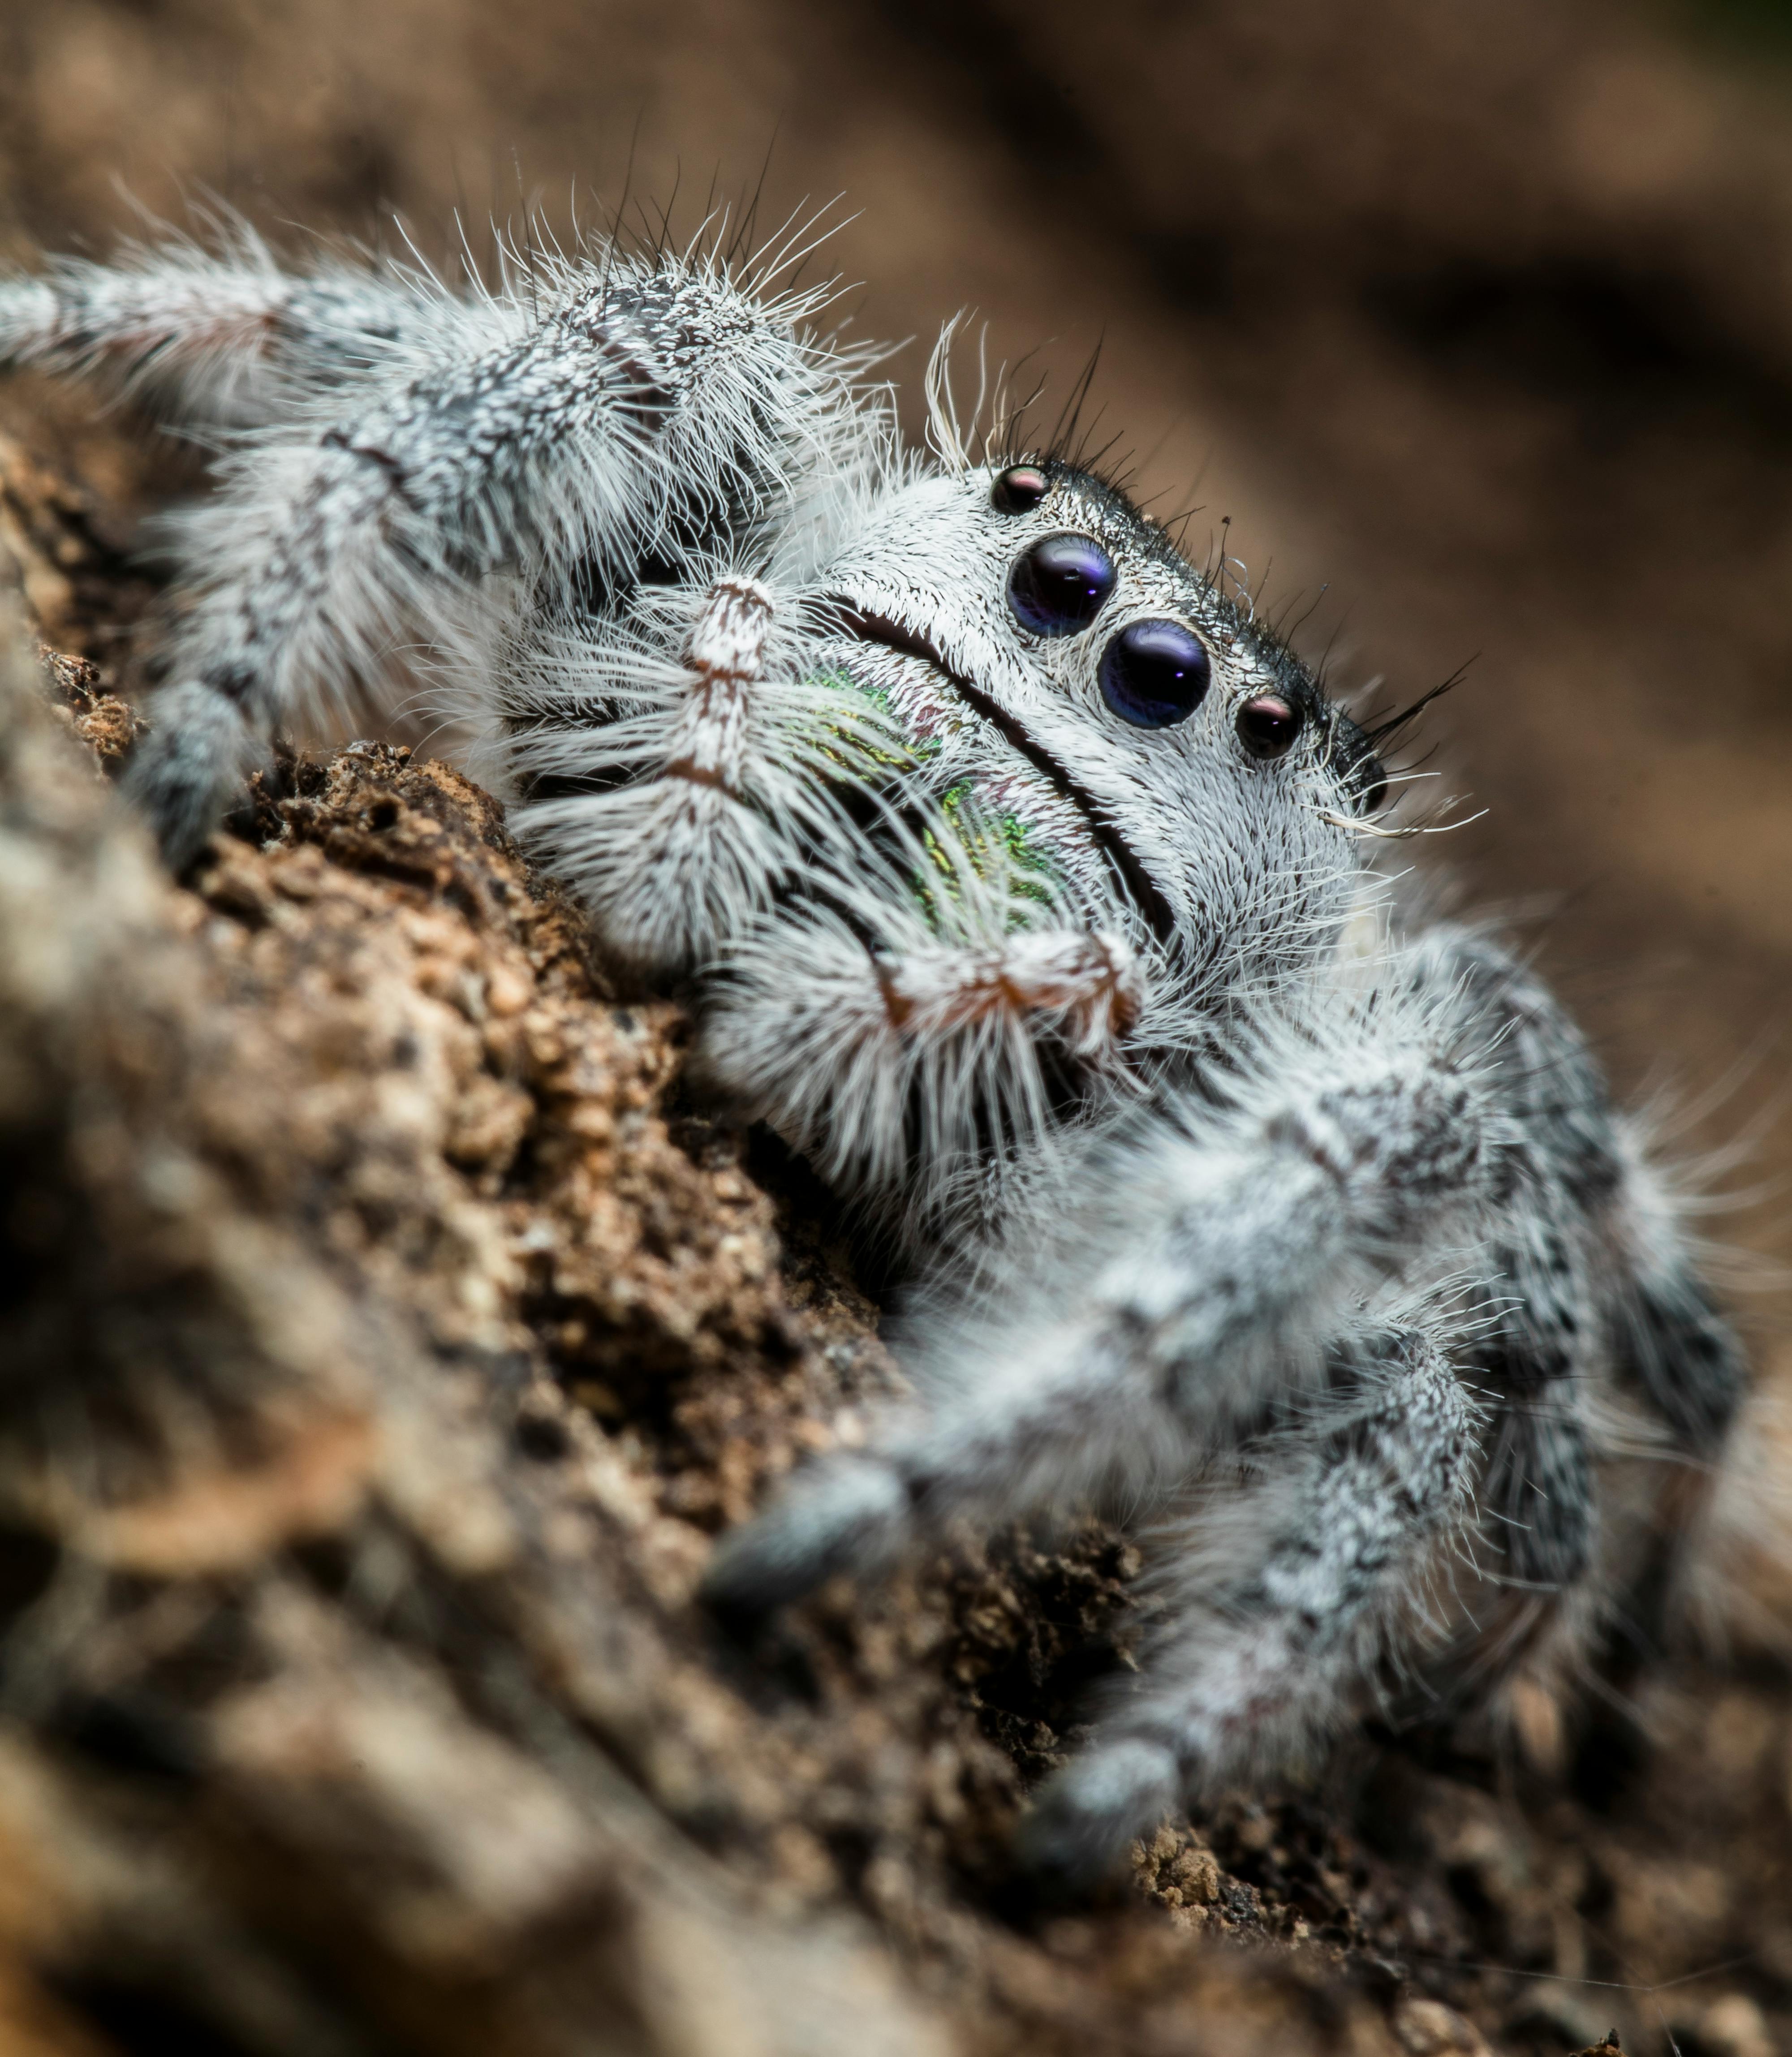 What Is The Courtship Behavior Of Tarantulas During Mating?